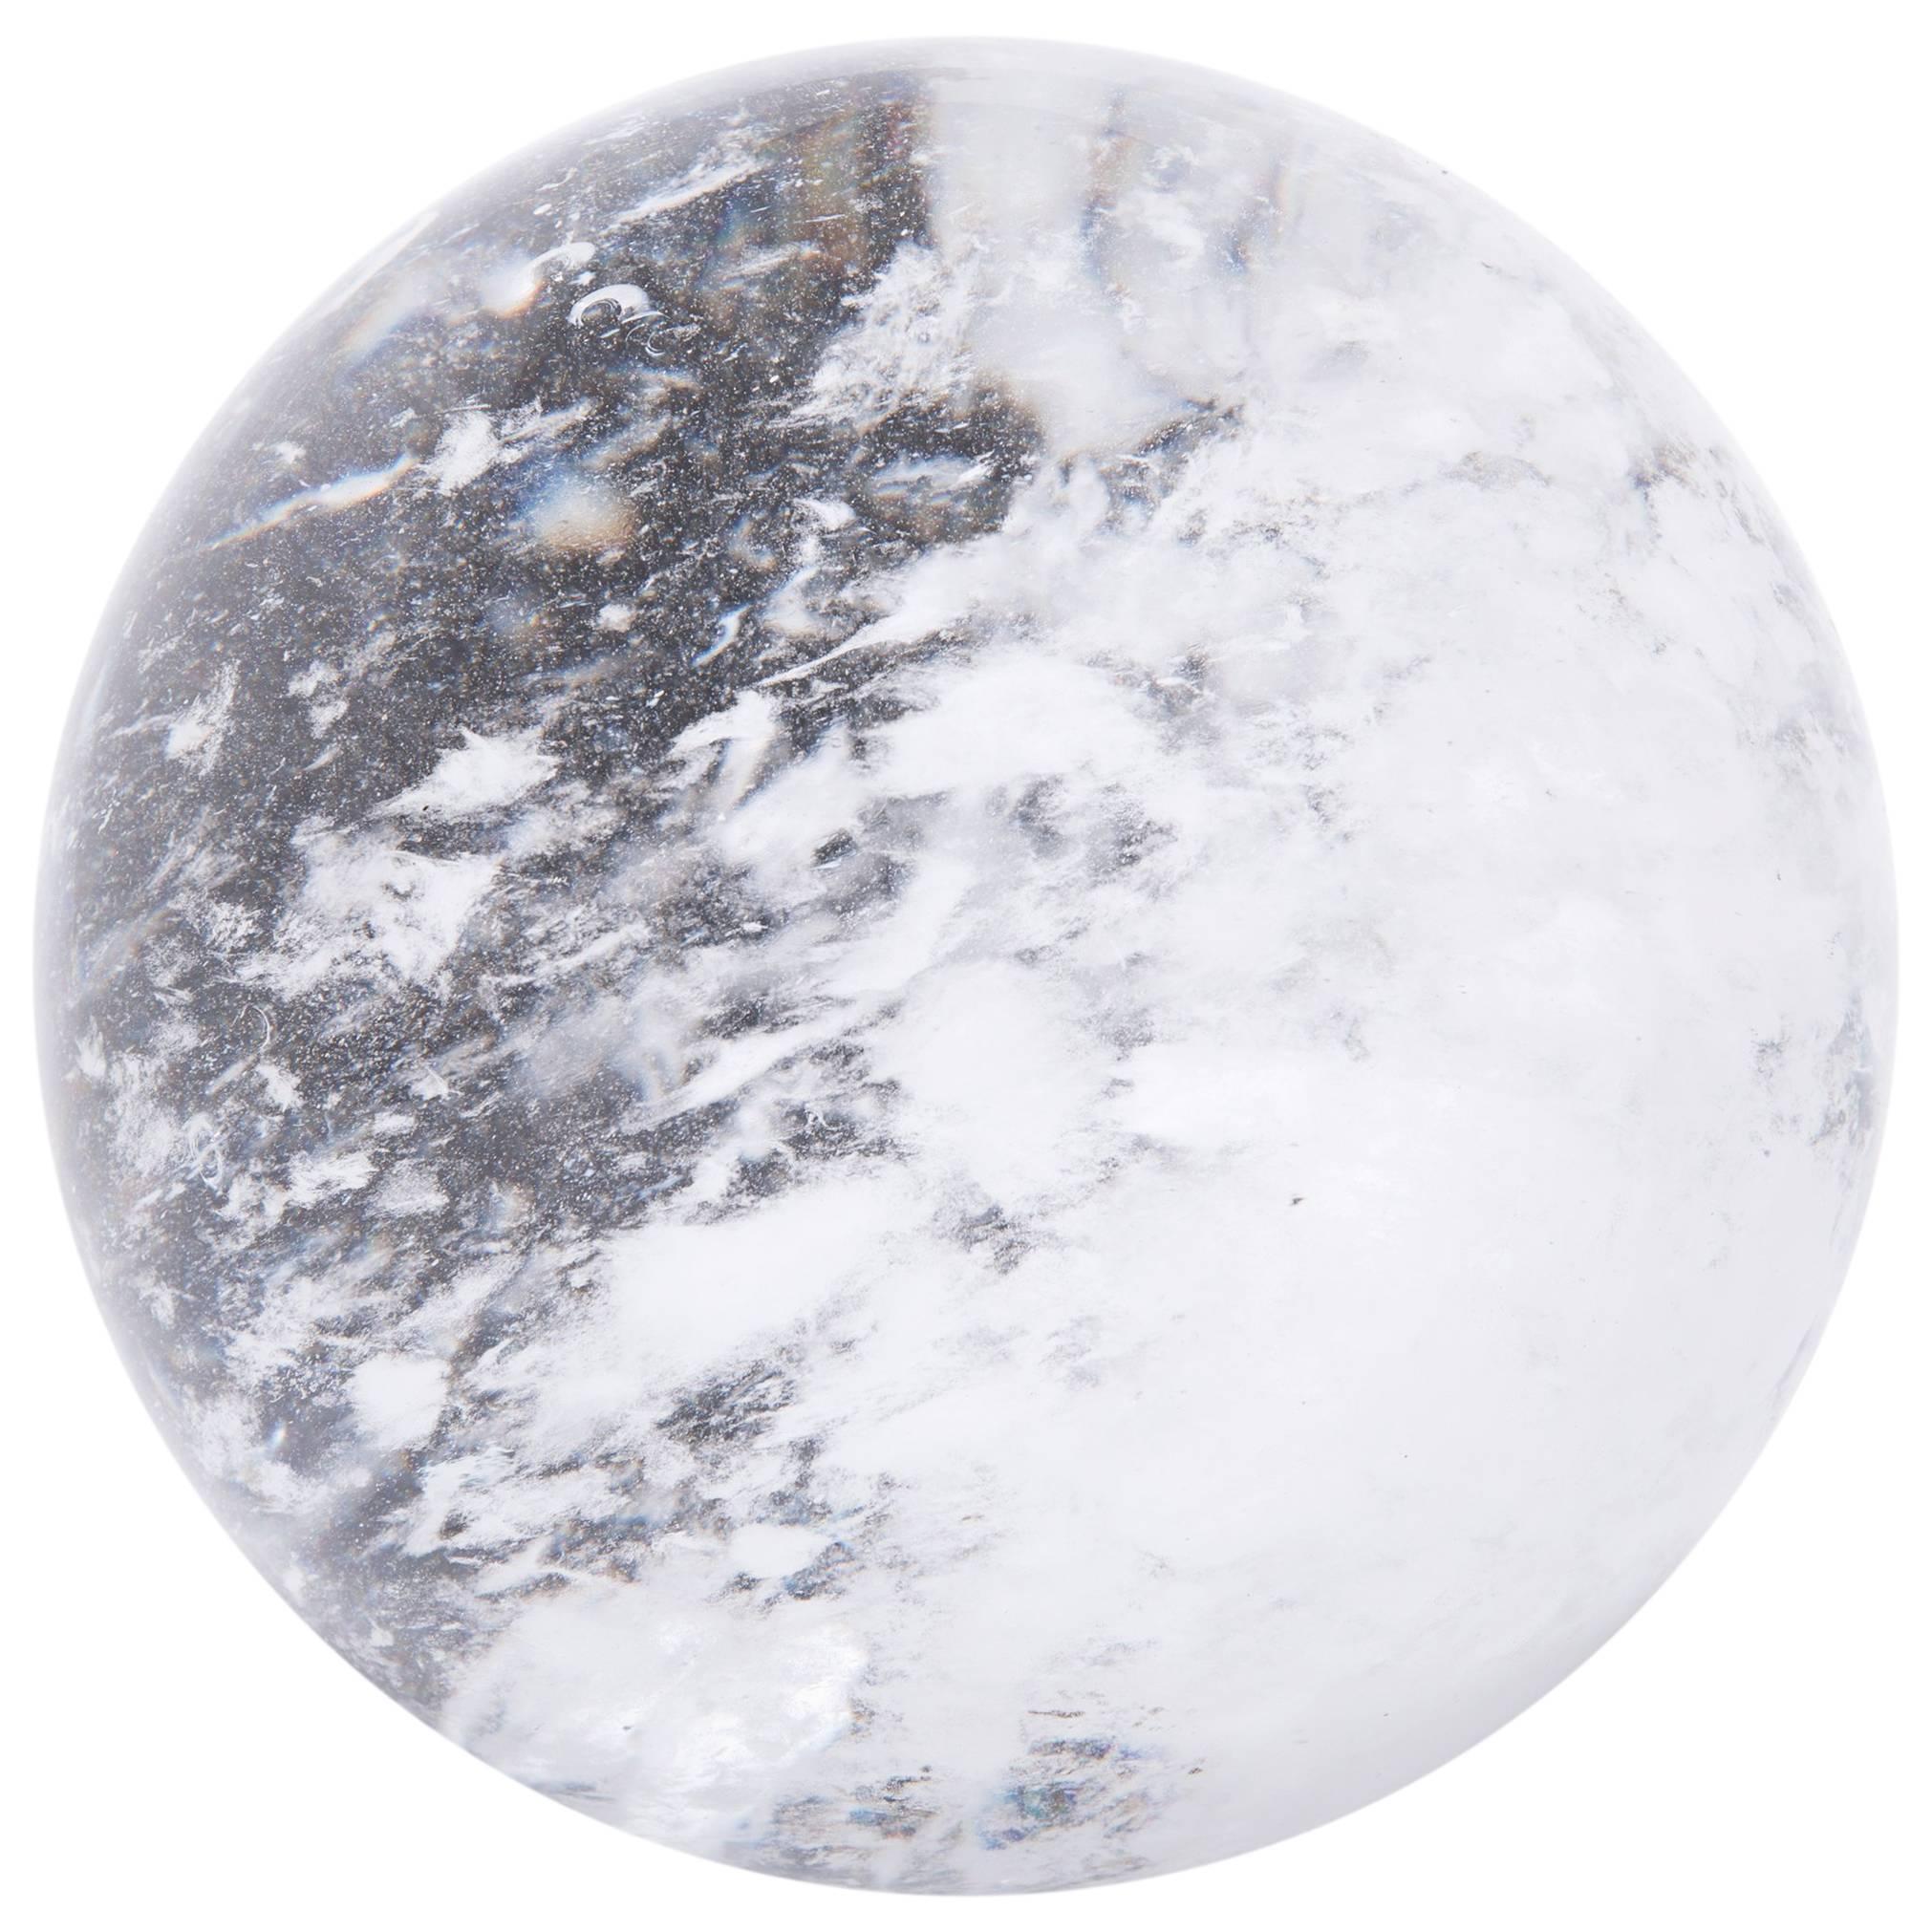 Chinese Rock Crystal Sphere with Occlusions